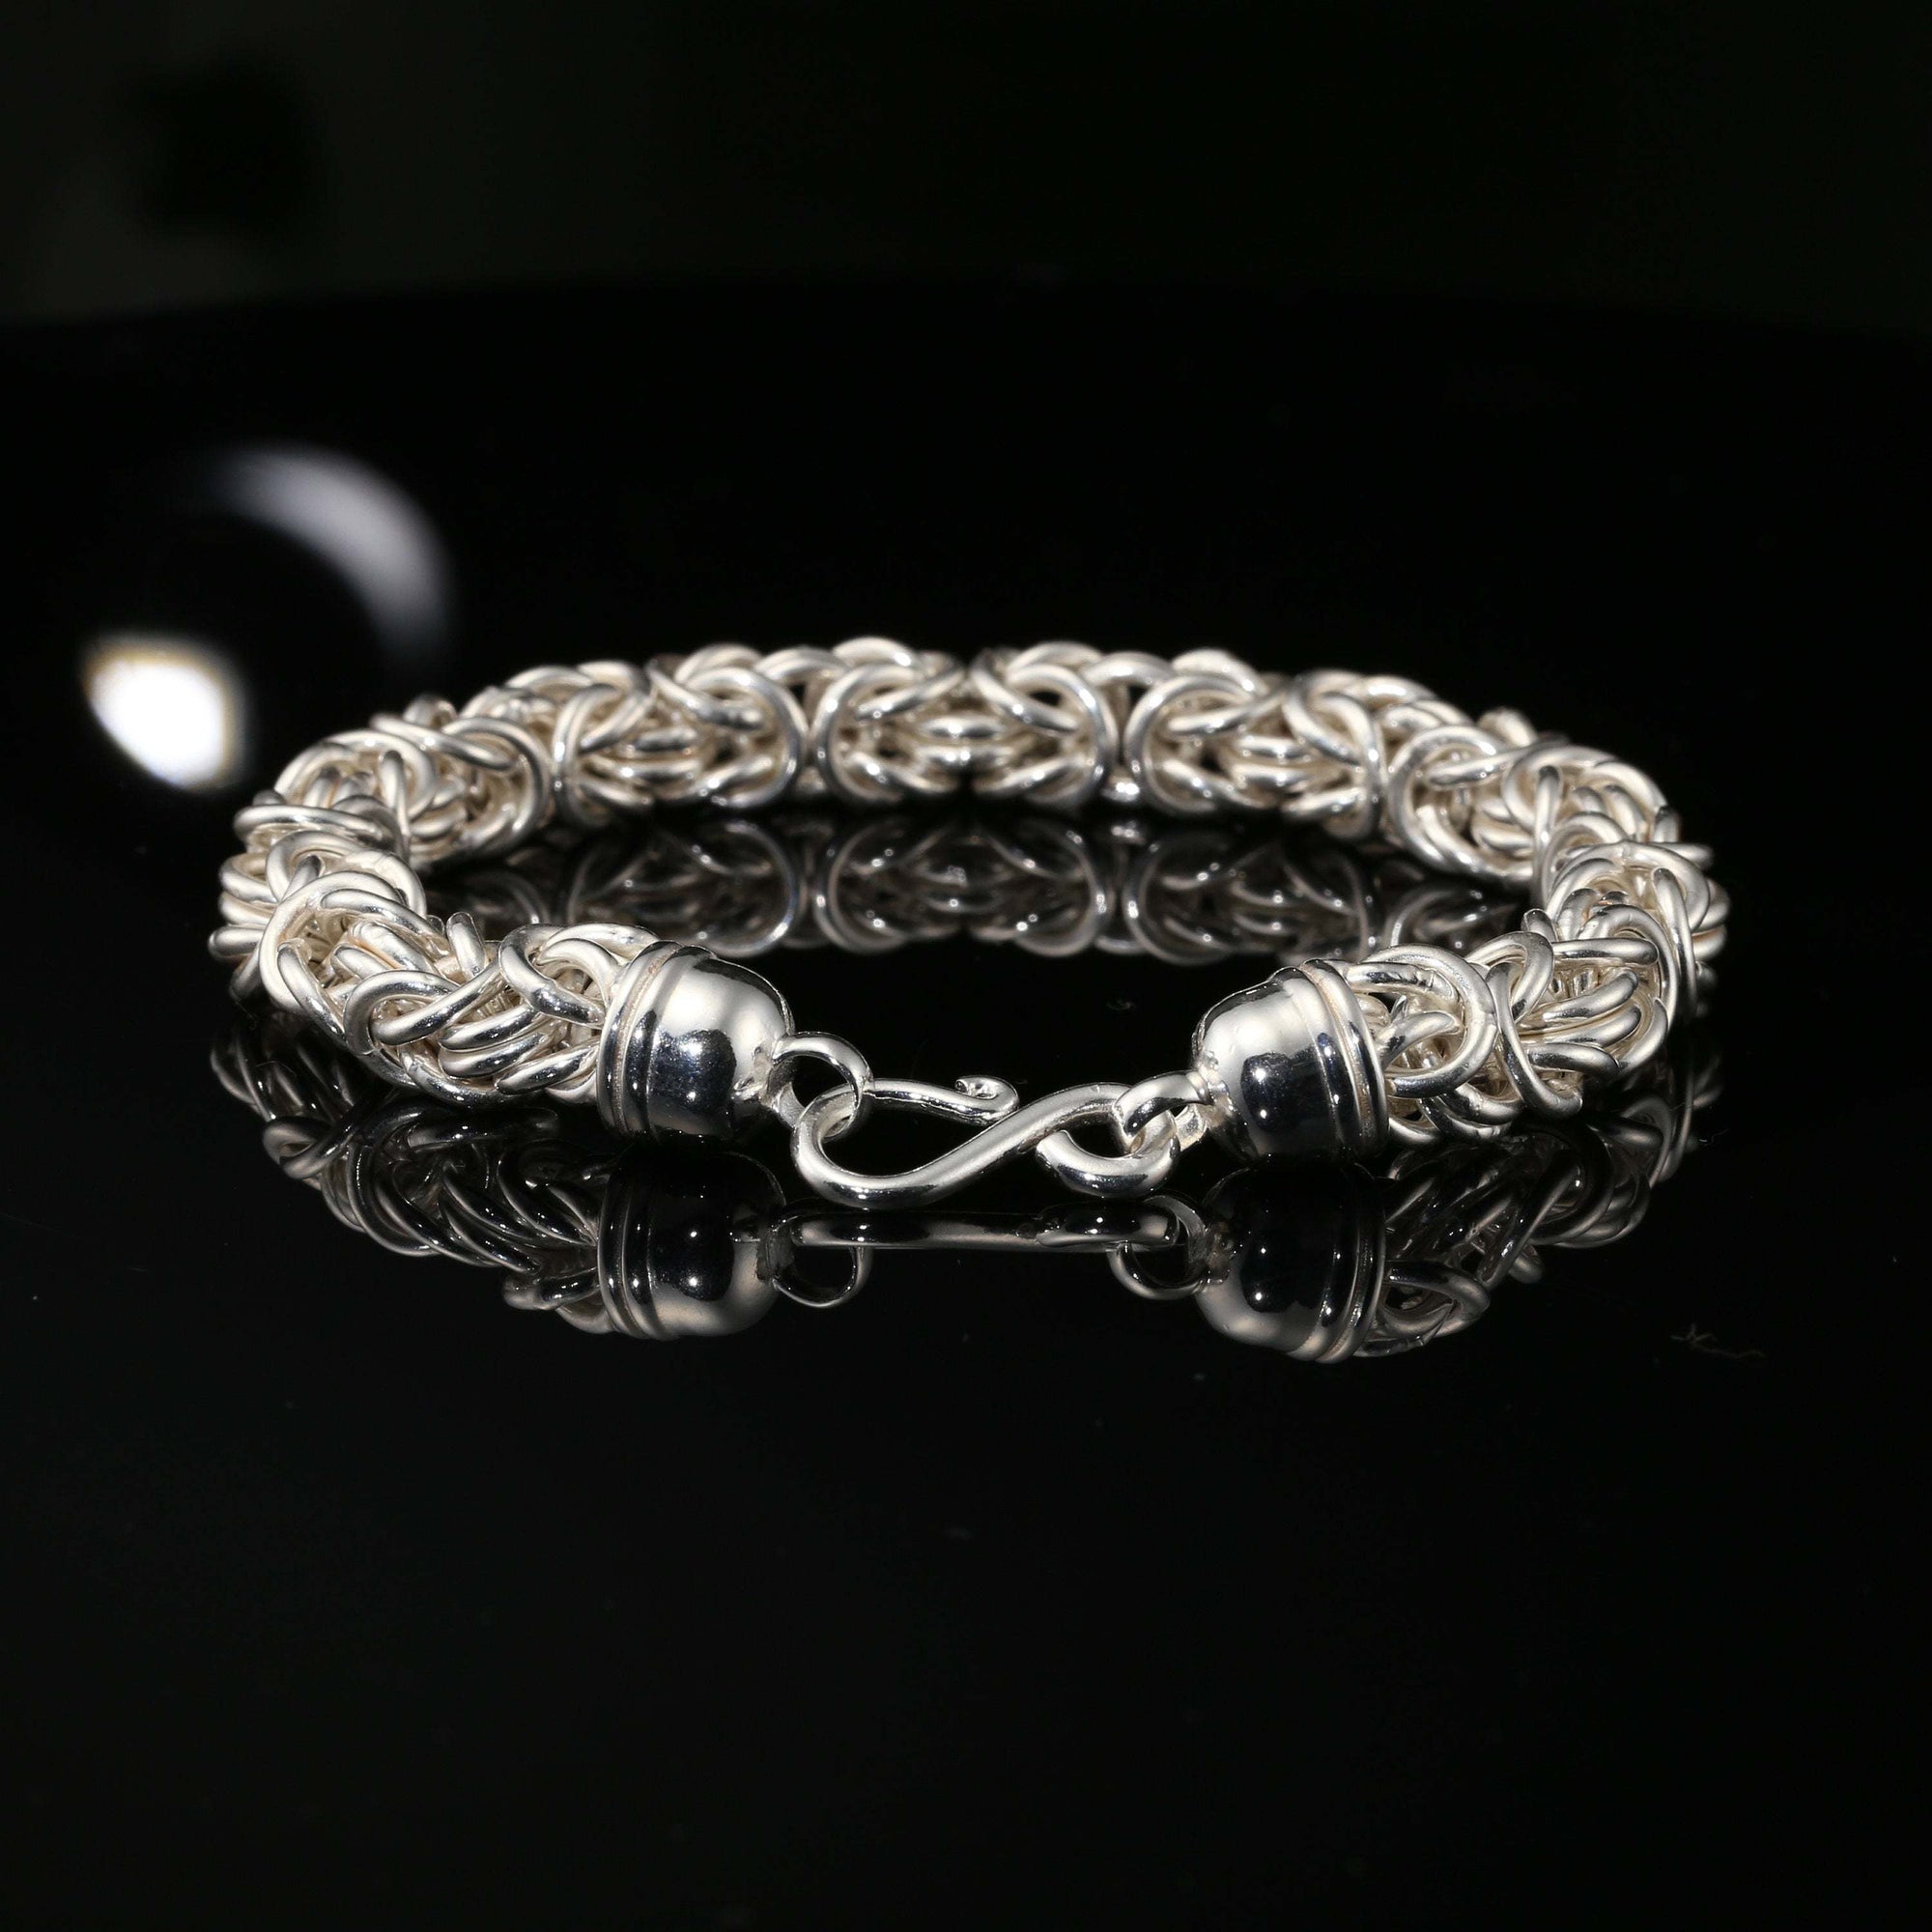 Handmade Byzantine Chain Bracelet with Hook Clasp, 8.75&quot;, Unisex in Sterling Silver